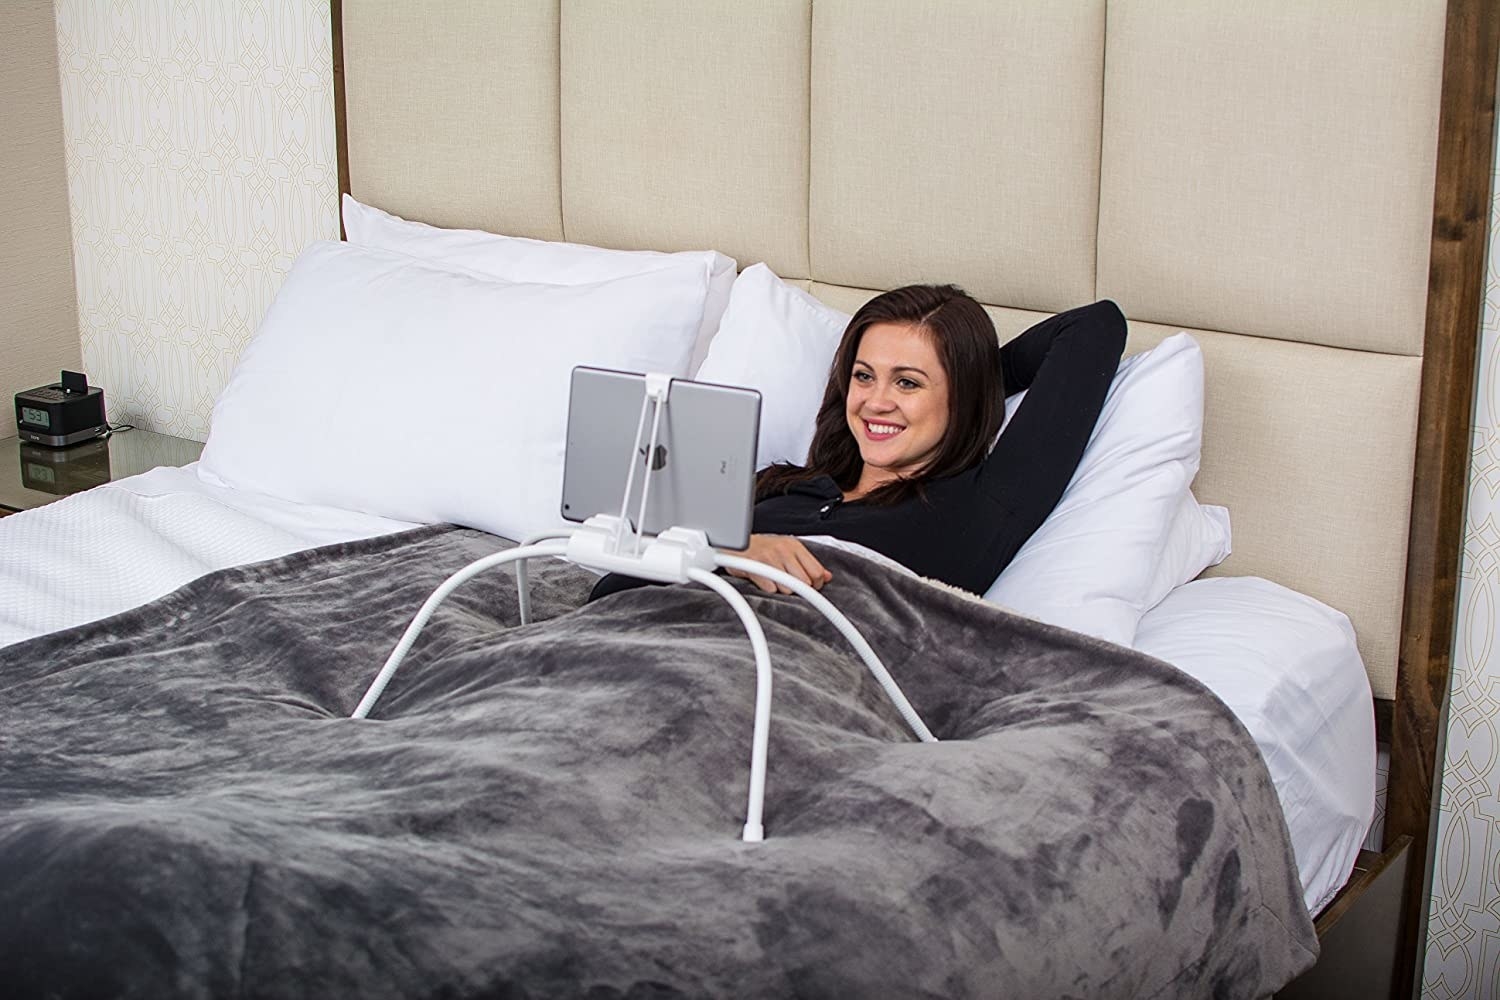 person laying in bed with this product with four legs standing over them holding up a tablet